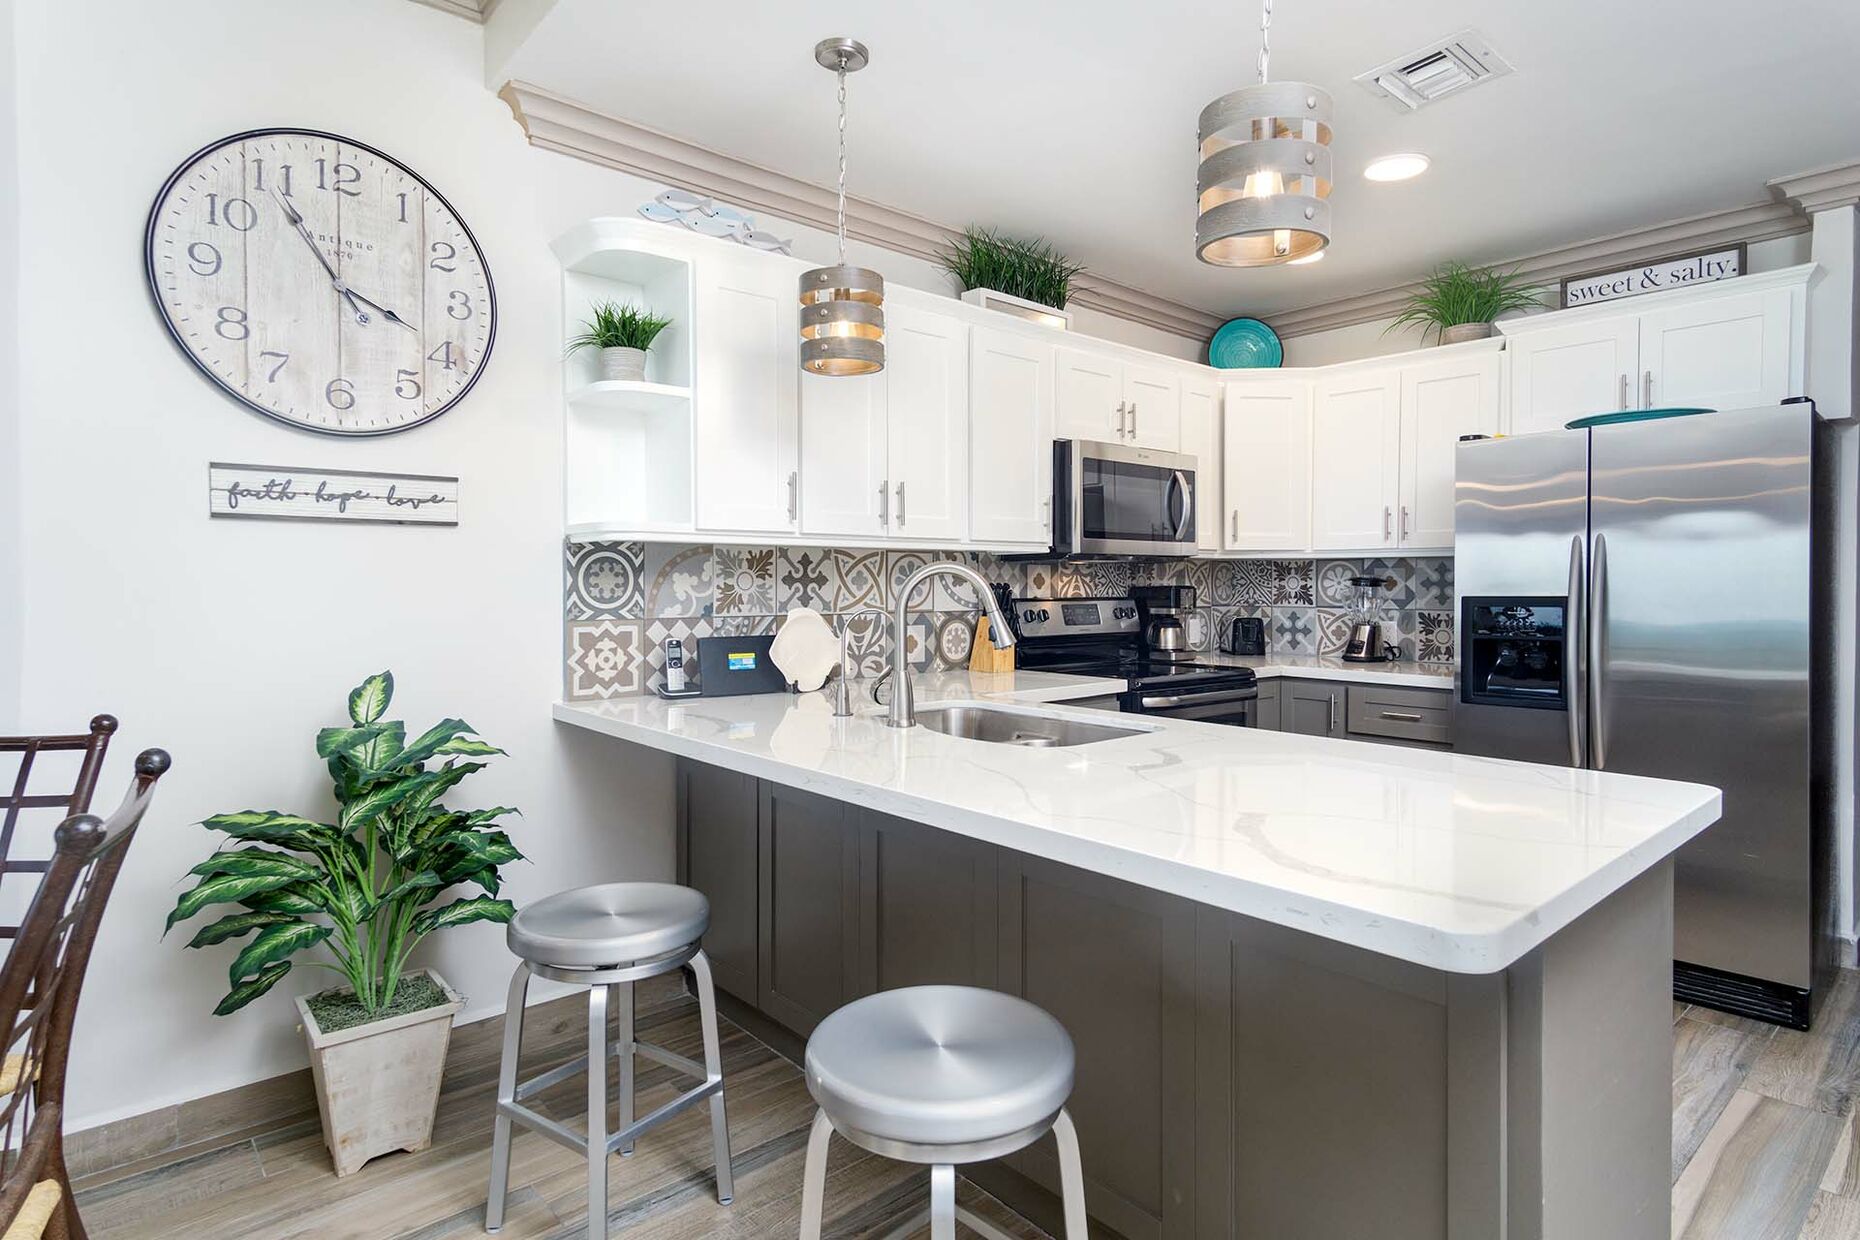 The updated kitchen is stylish and modern!